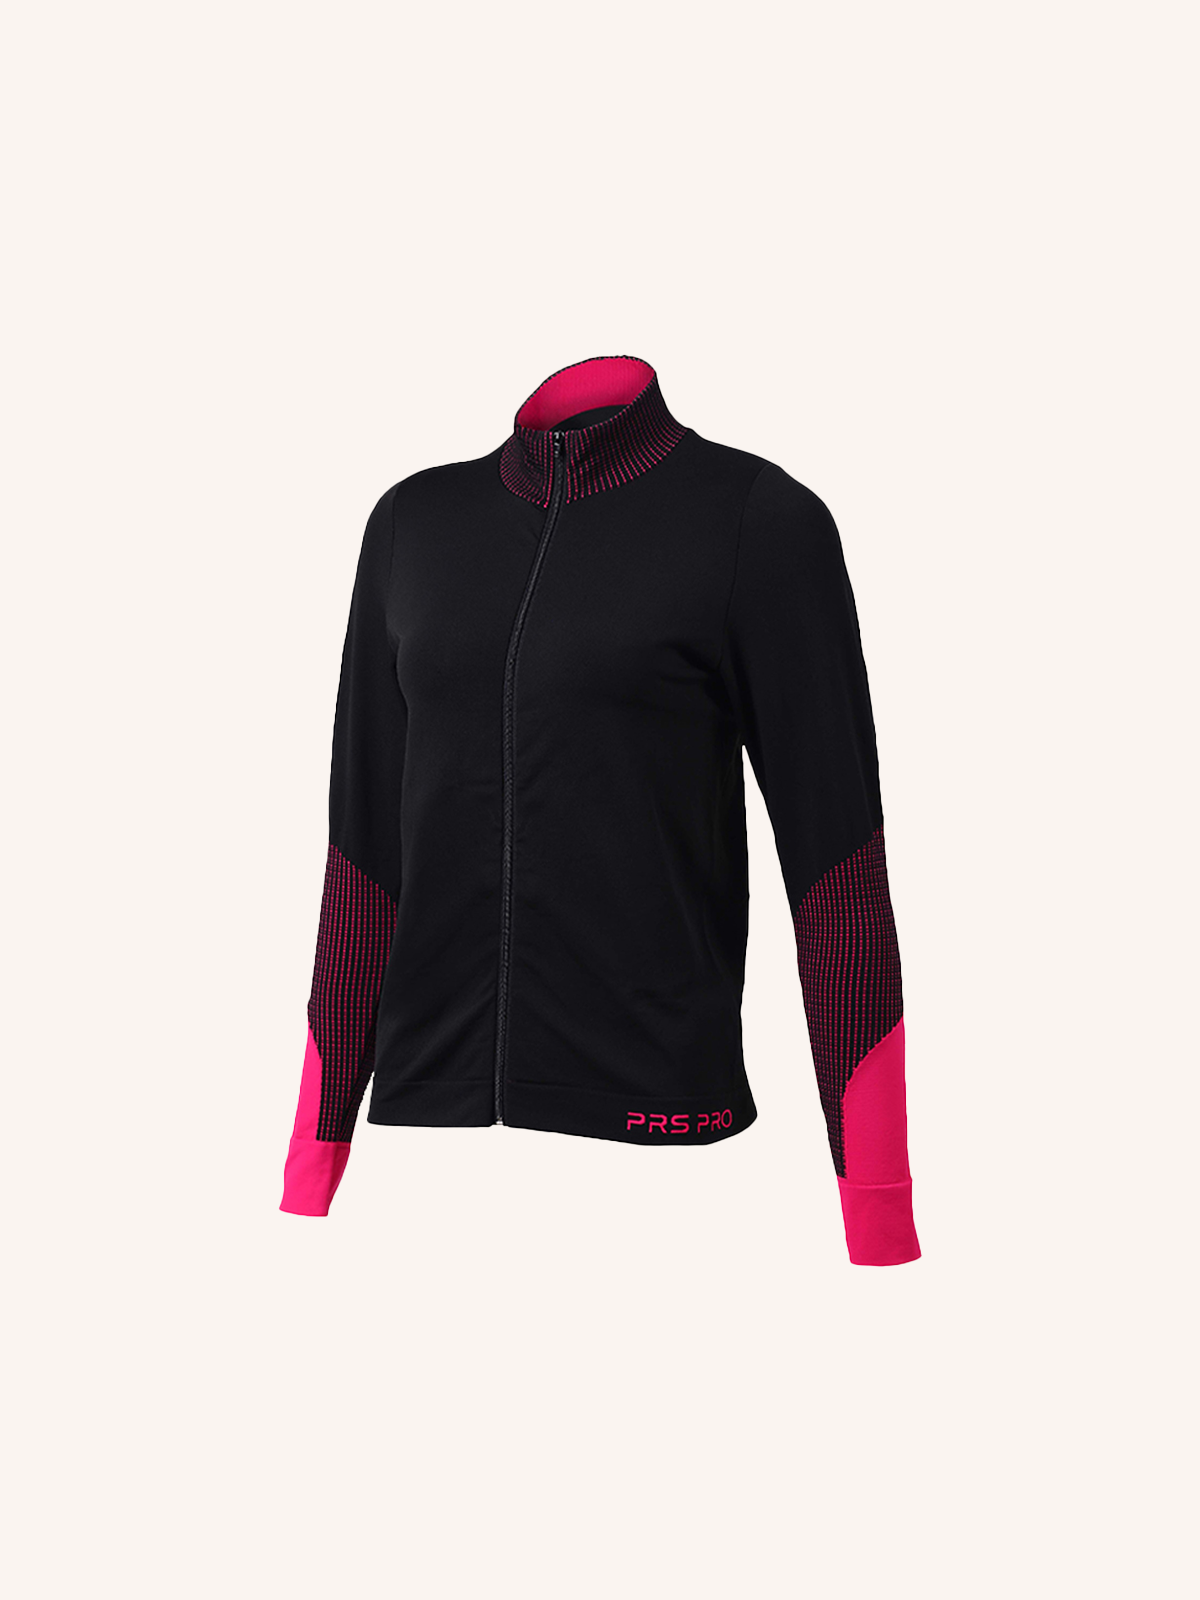 Thermal Running Sweatshirt for Women | Plain Color | Single Pack | PRS PRO 26